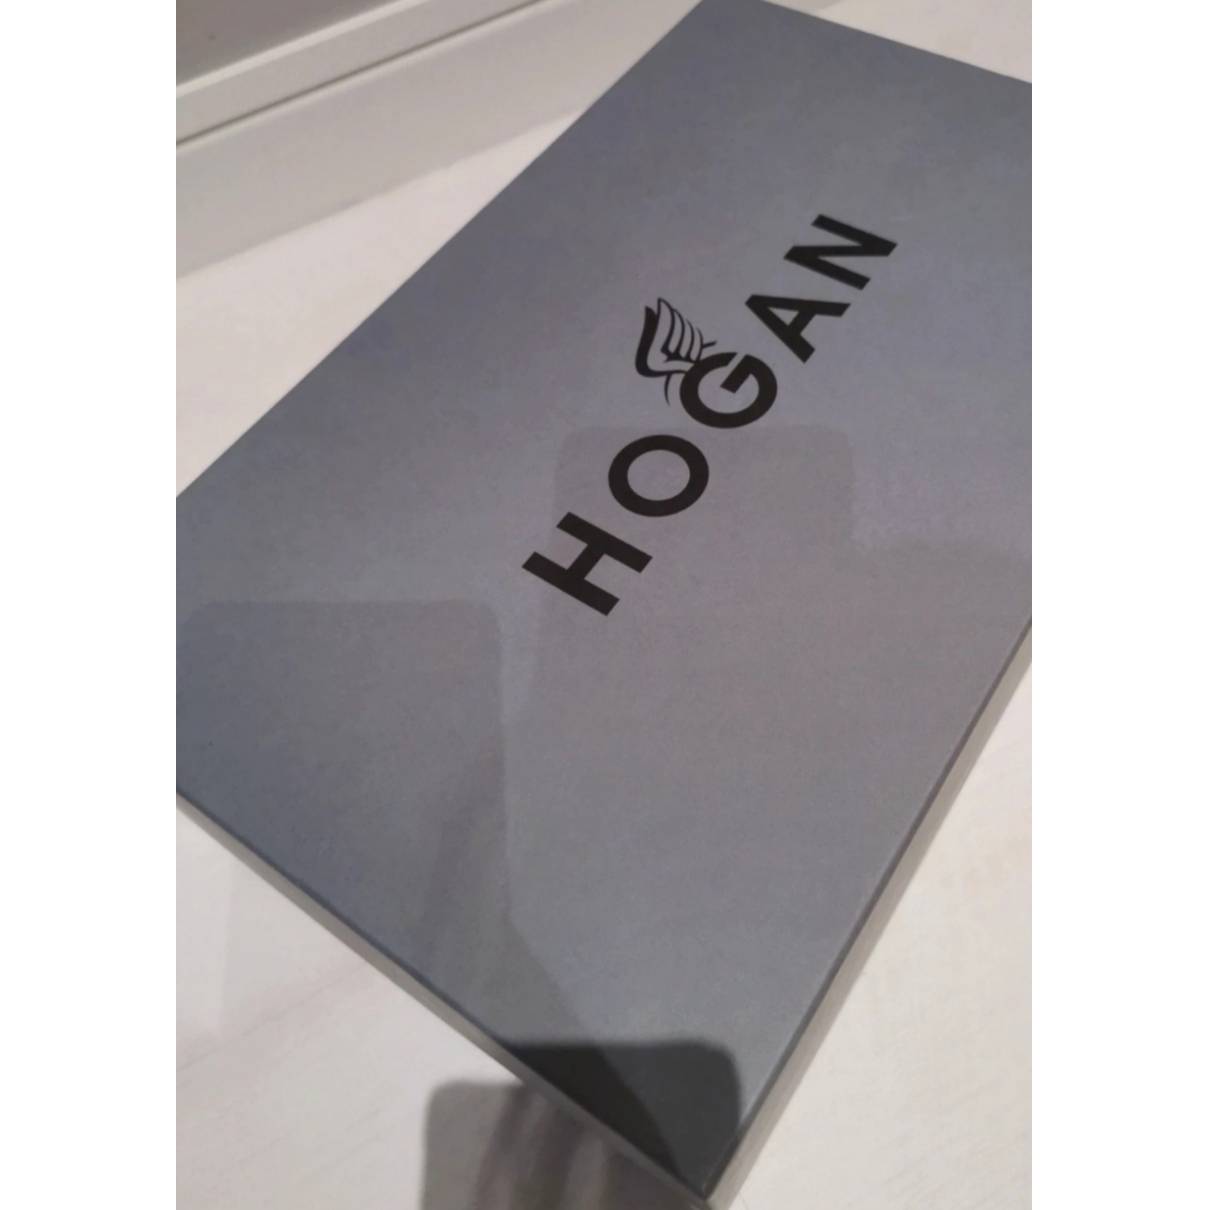 Buy Hogan Leather low trainers online